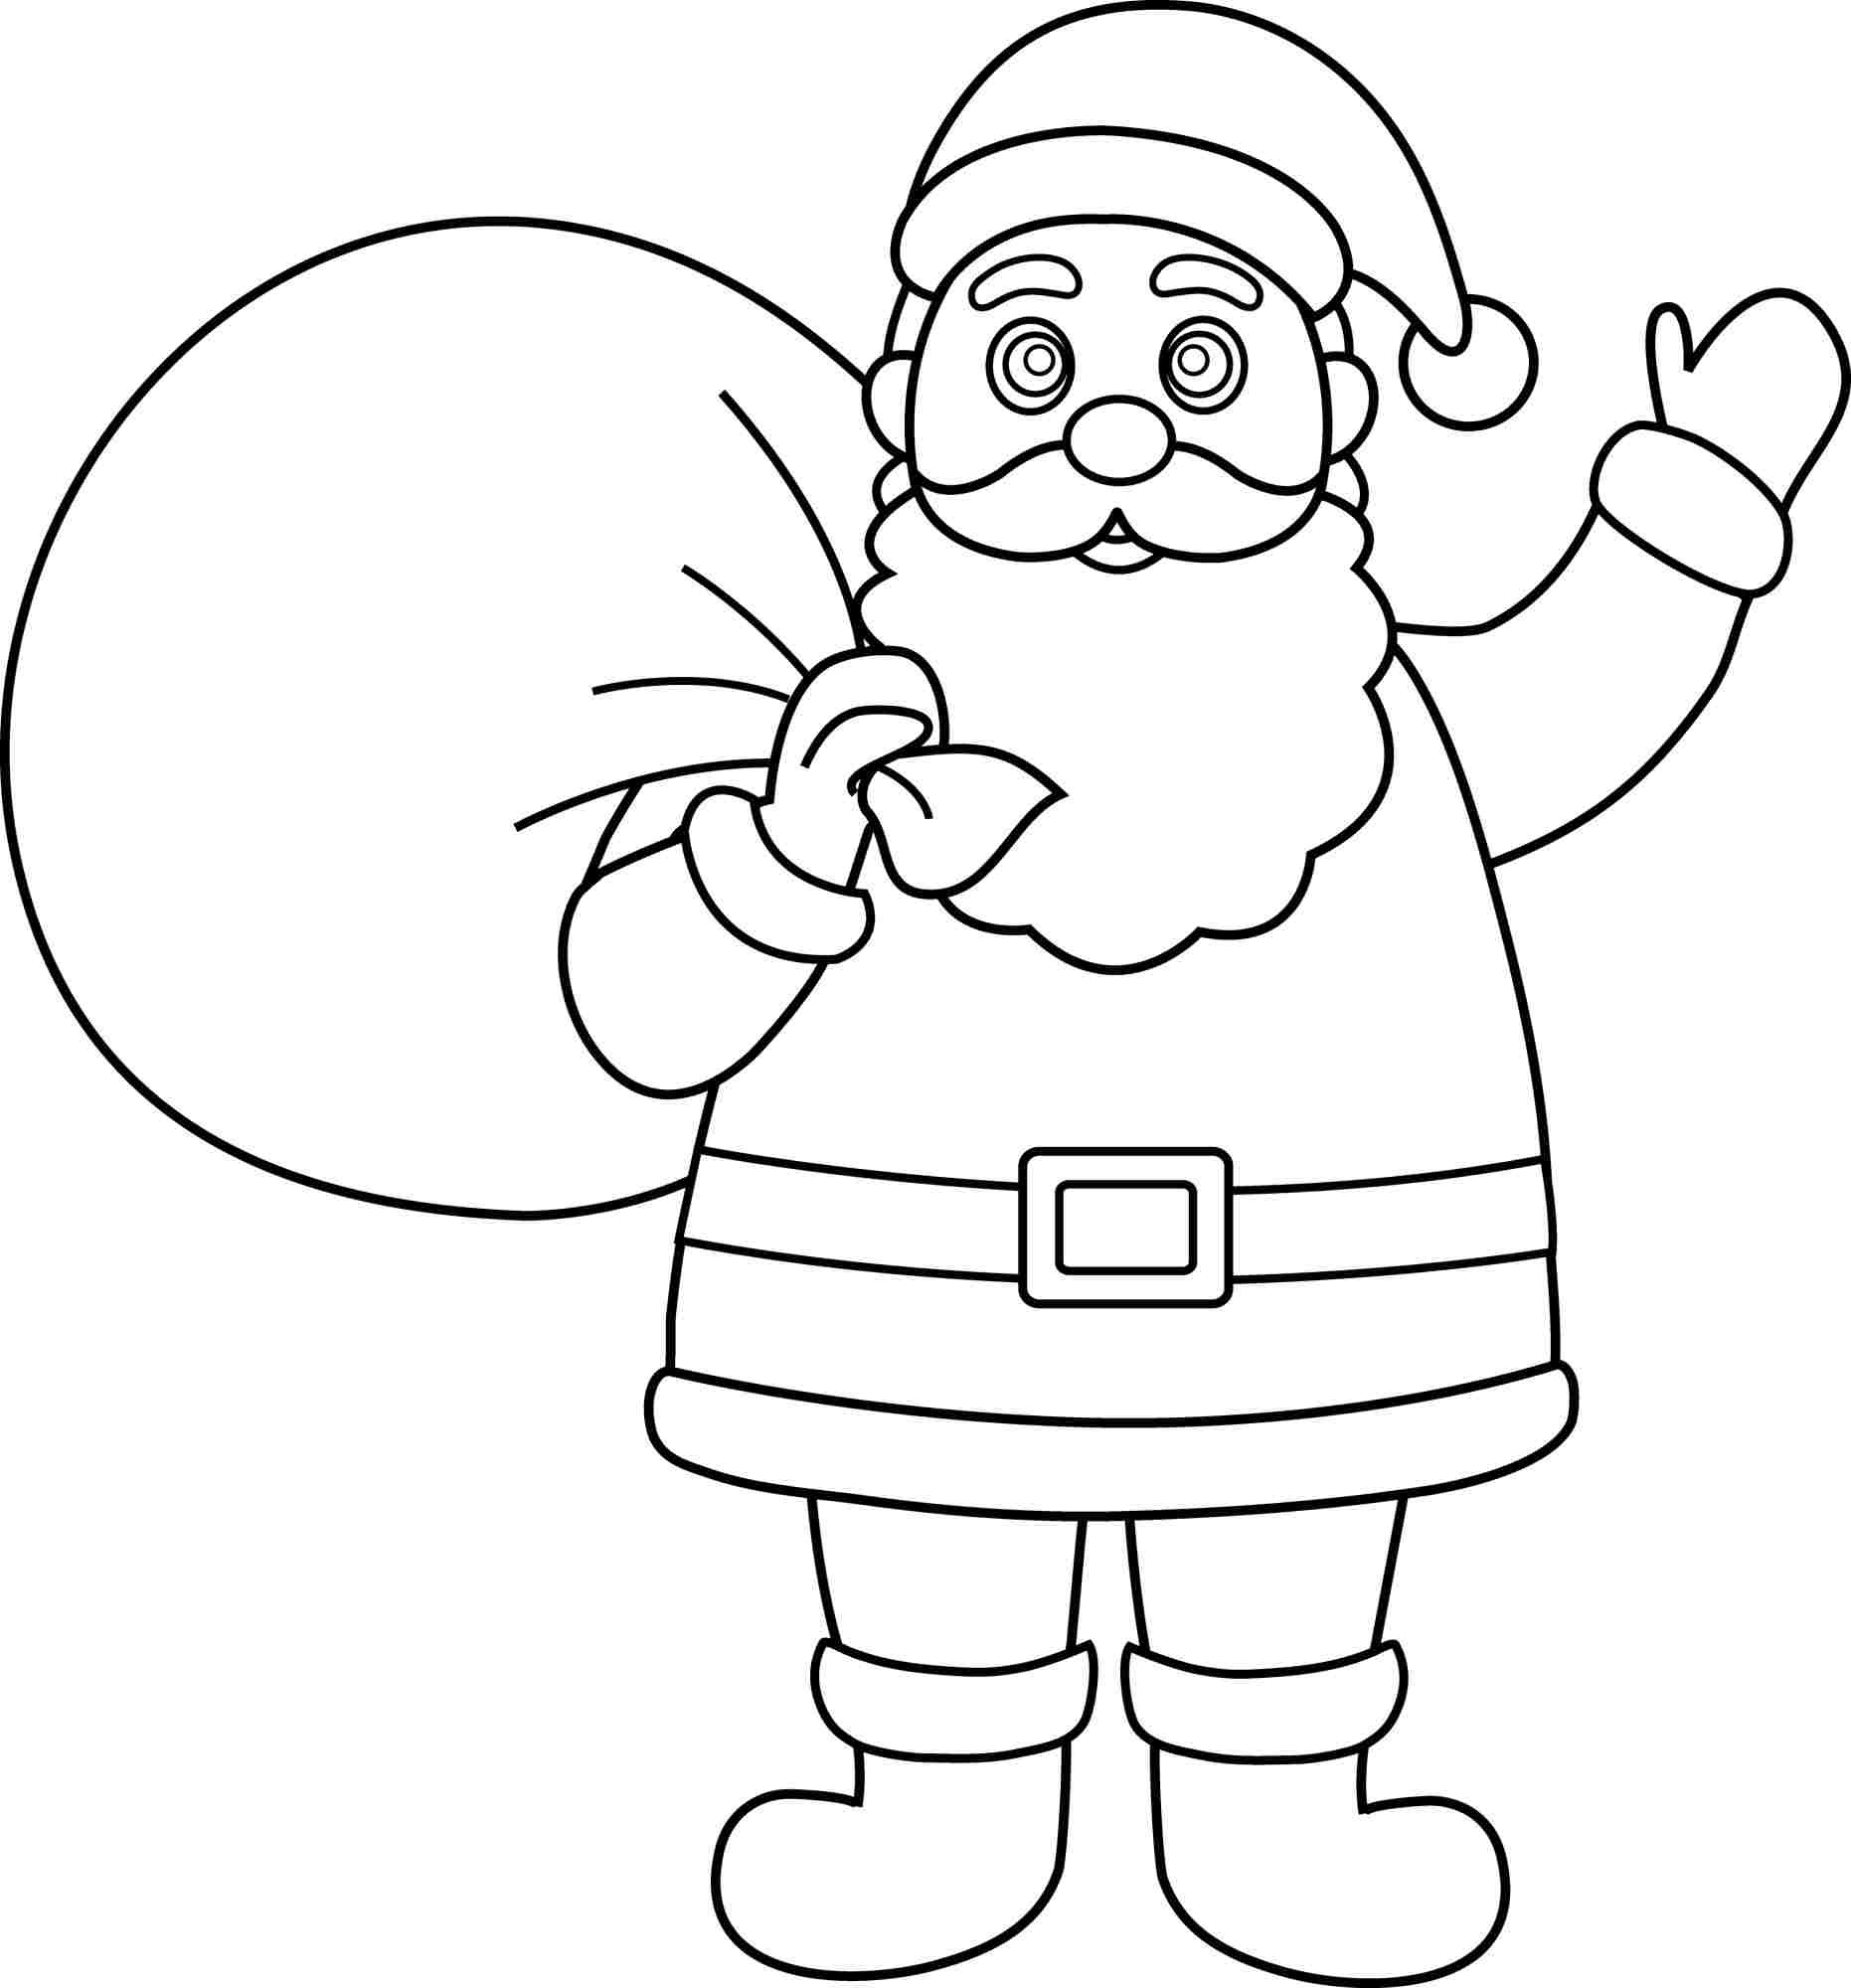 Easy How to Draw Mrs. Claus Tutorial & Mrs. Claus Coloring Page